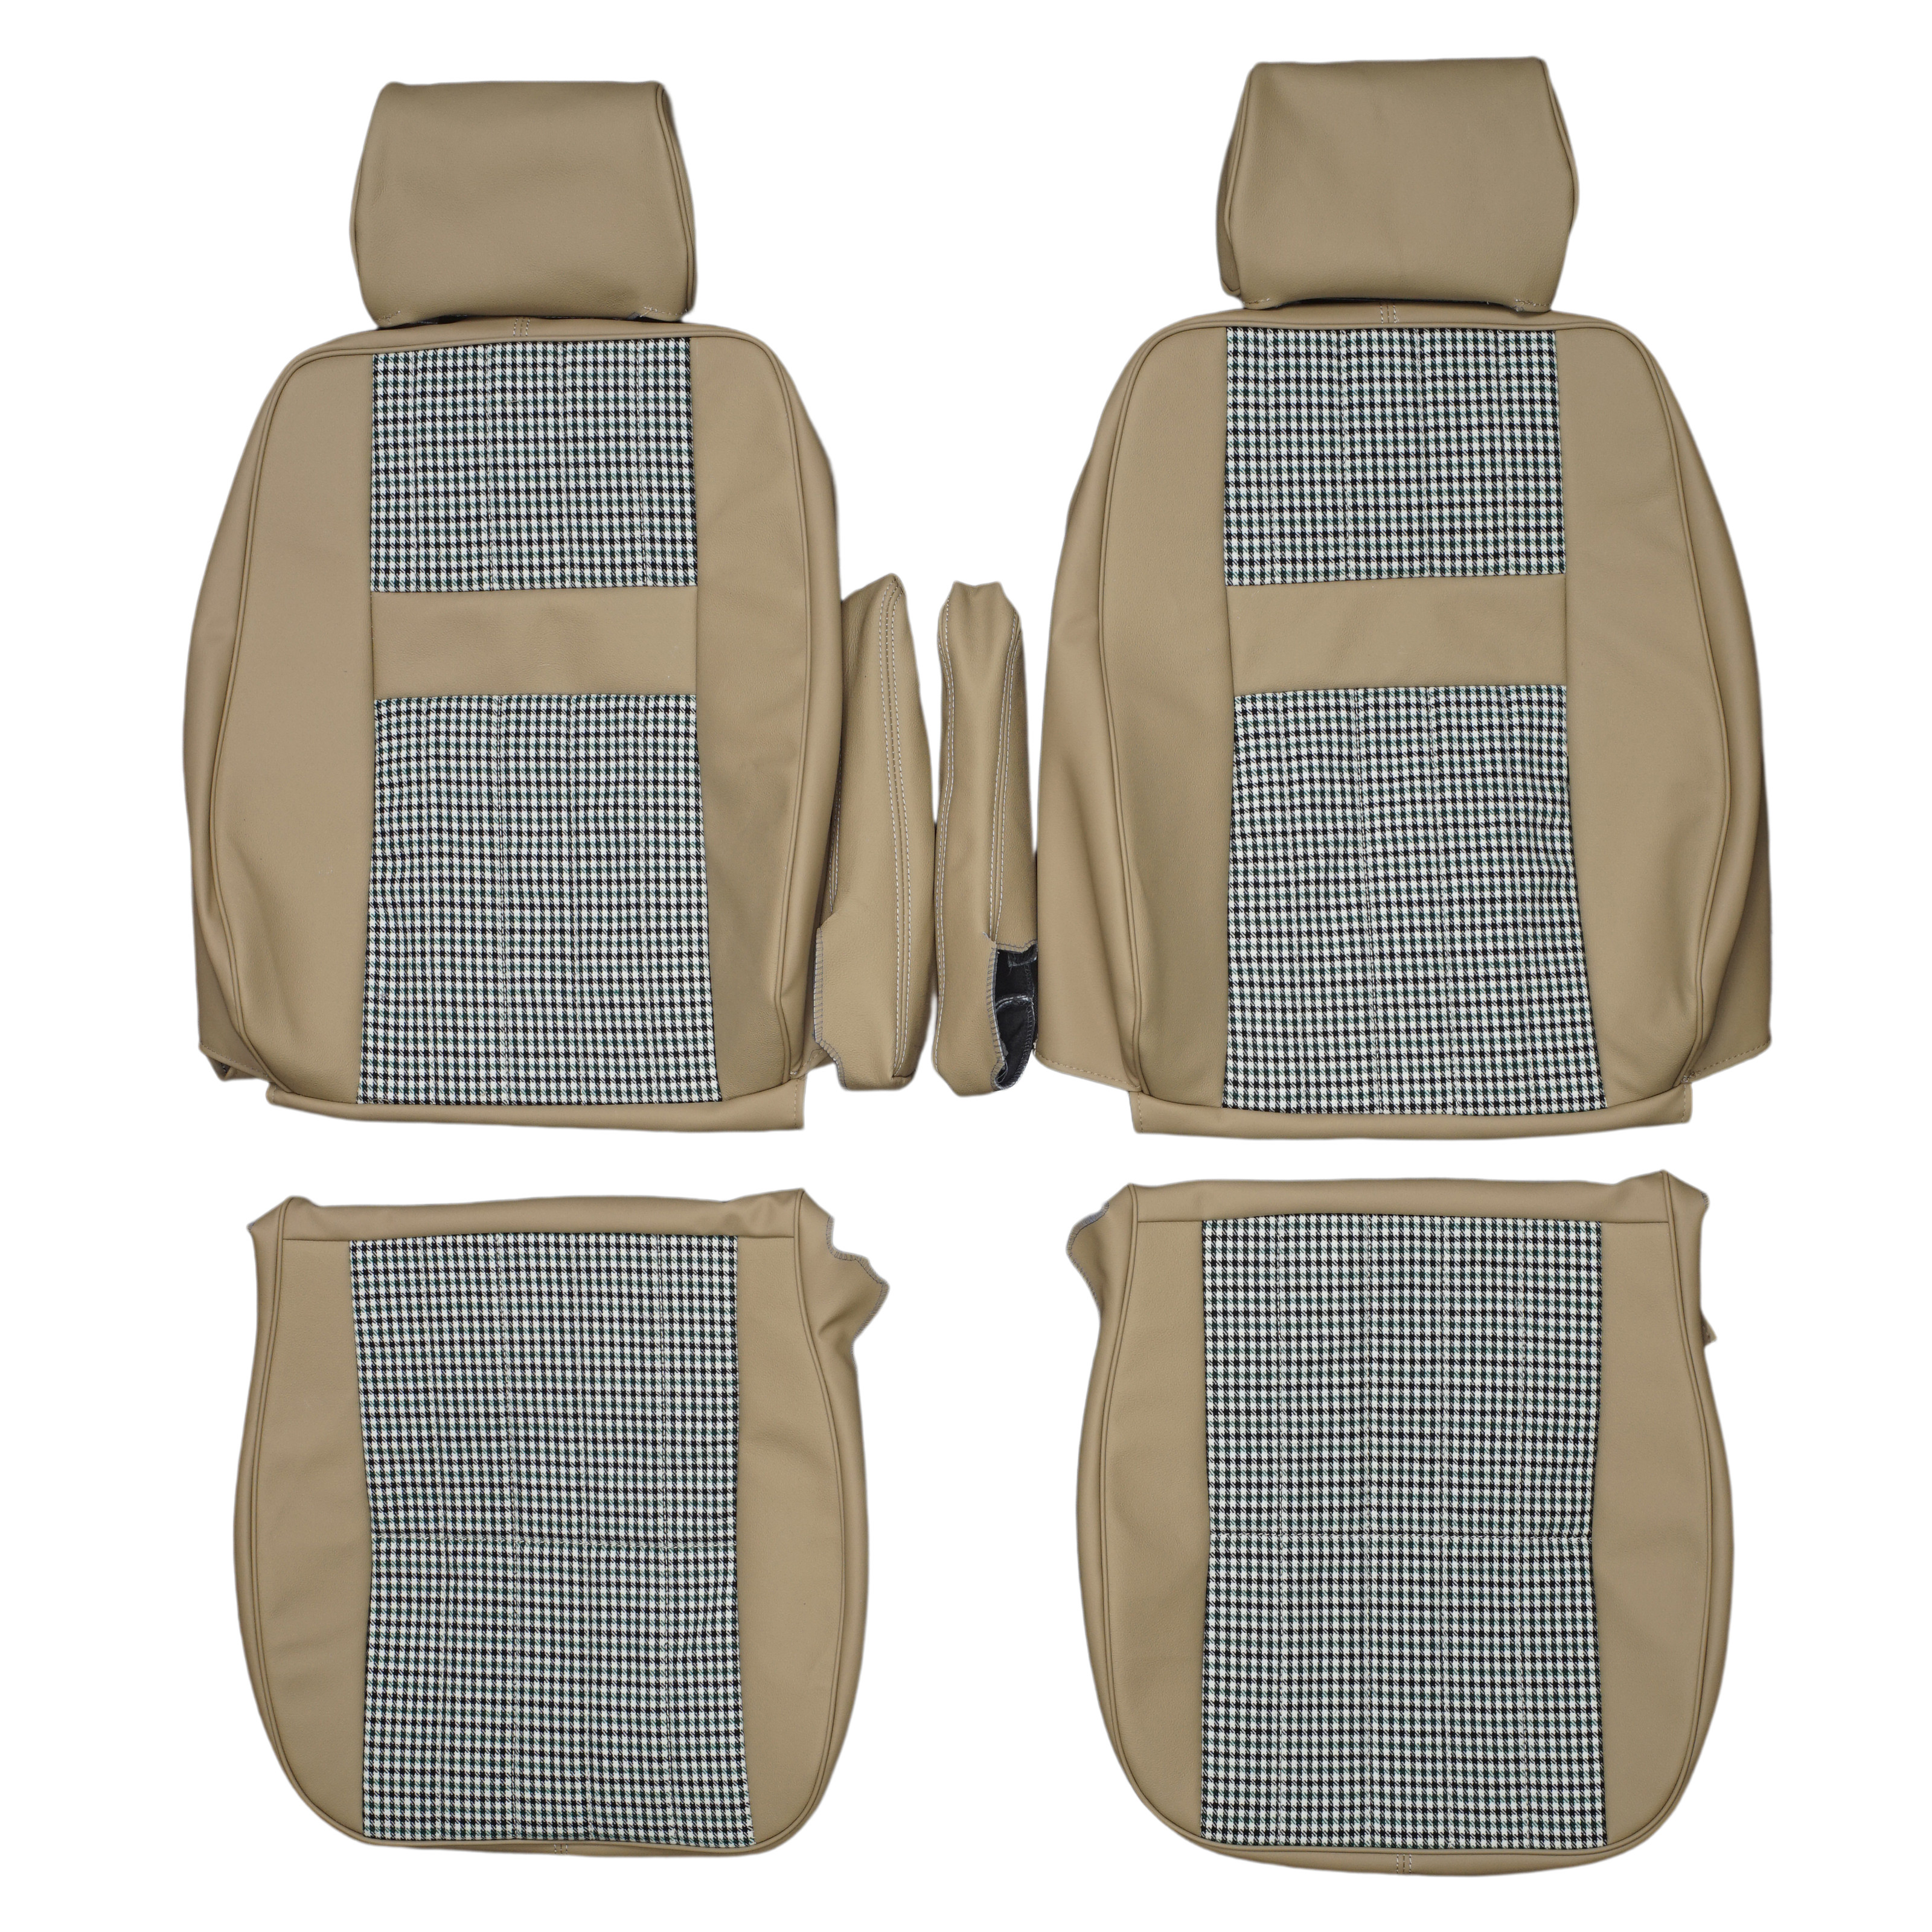 1997-2002 Range Rover Custom Real Leather Seat Covers (Front) - Lseat.com